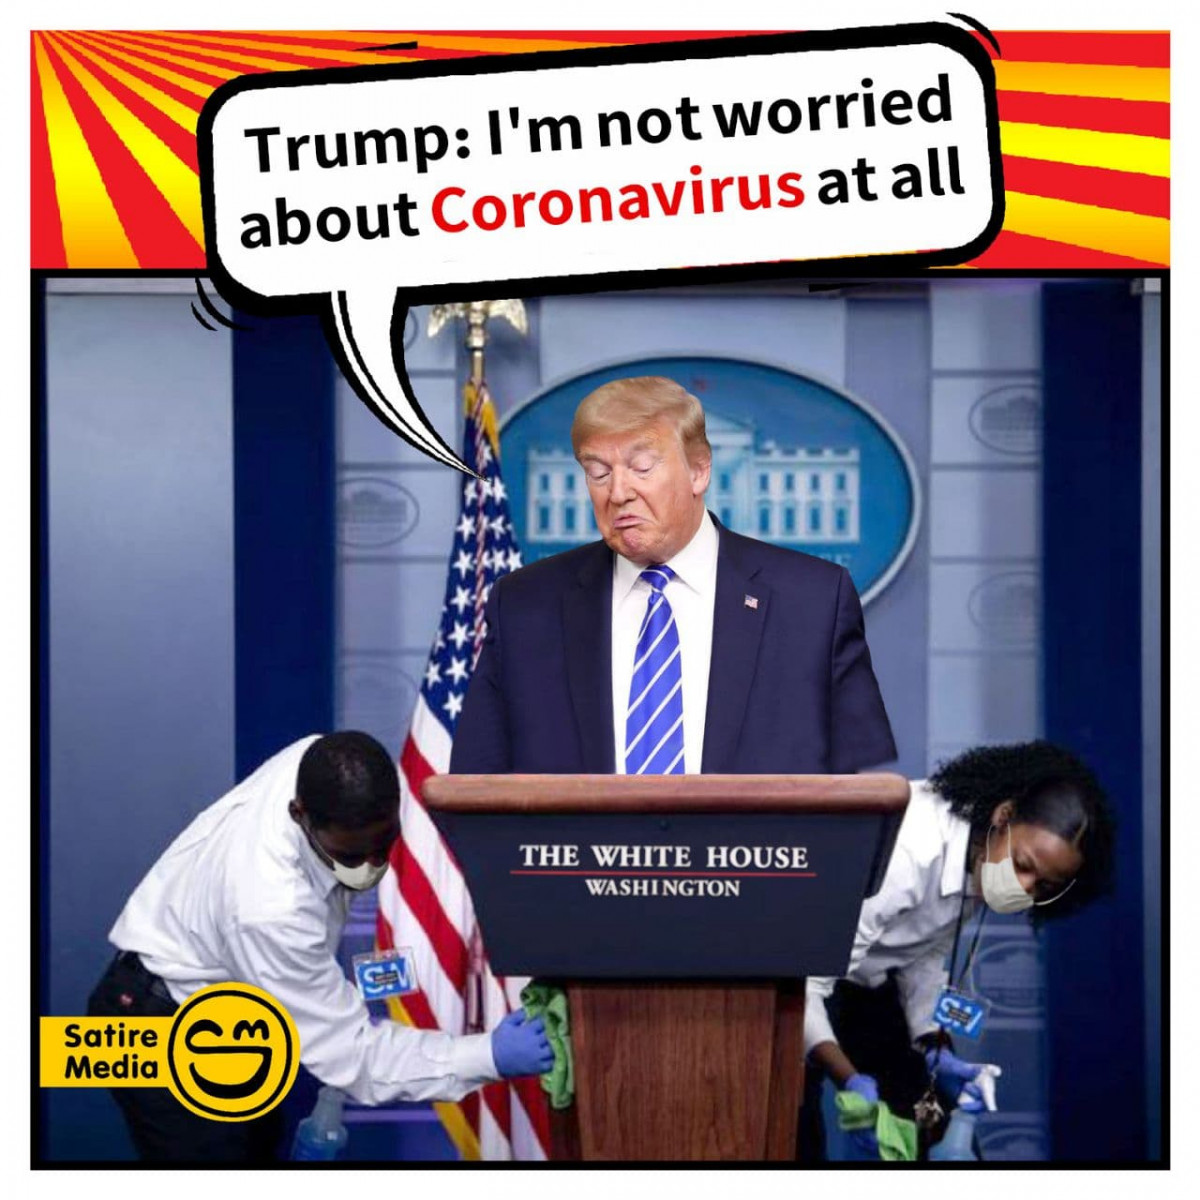 Trump: I'm not worried about Coronavirus at all